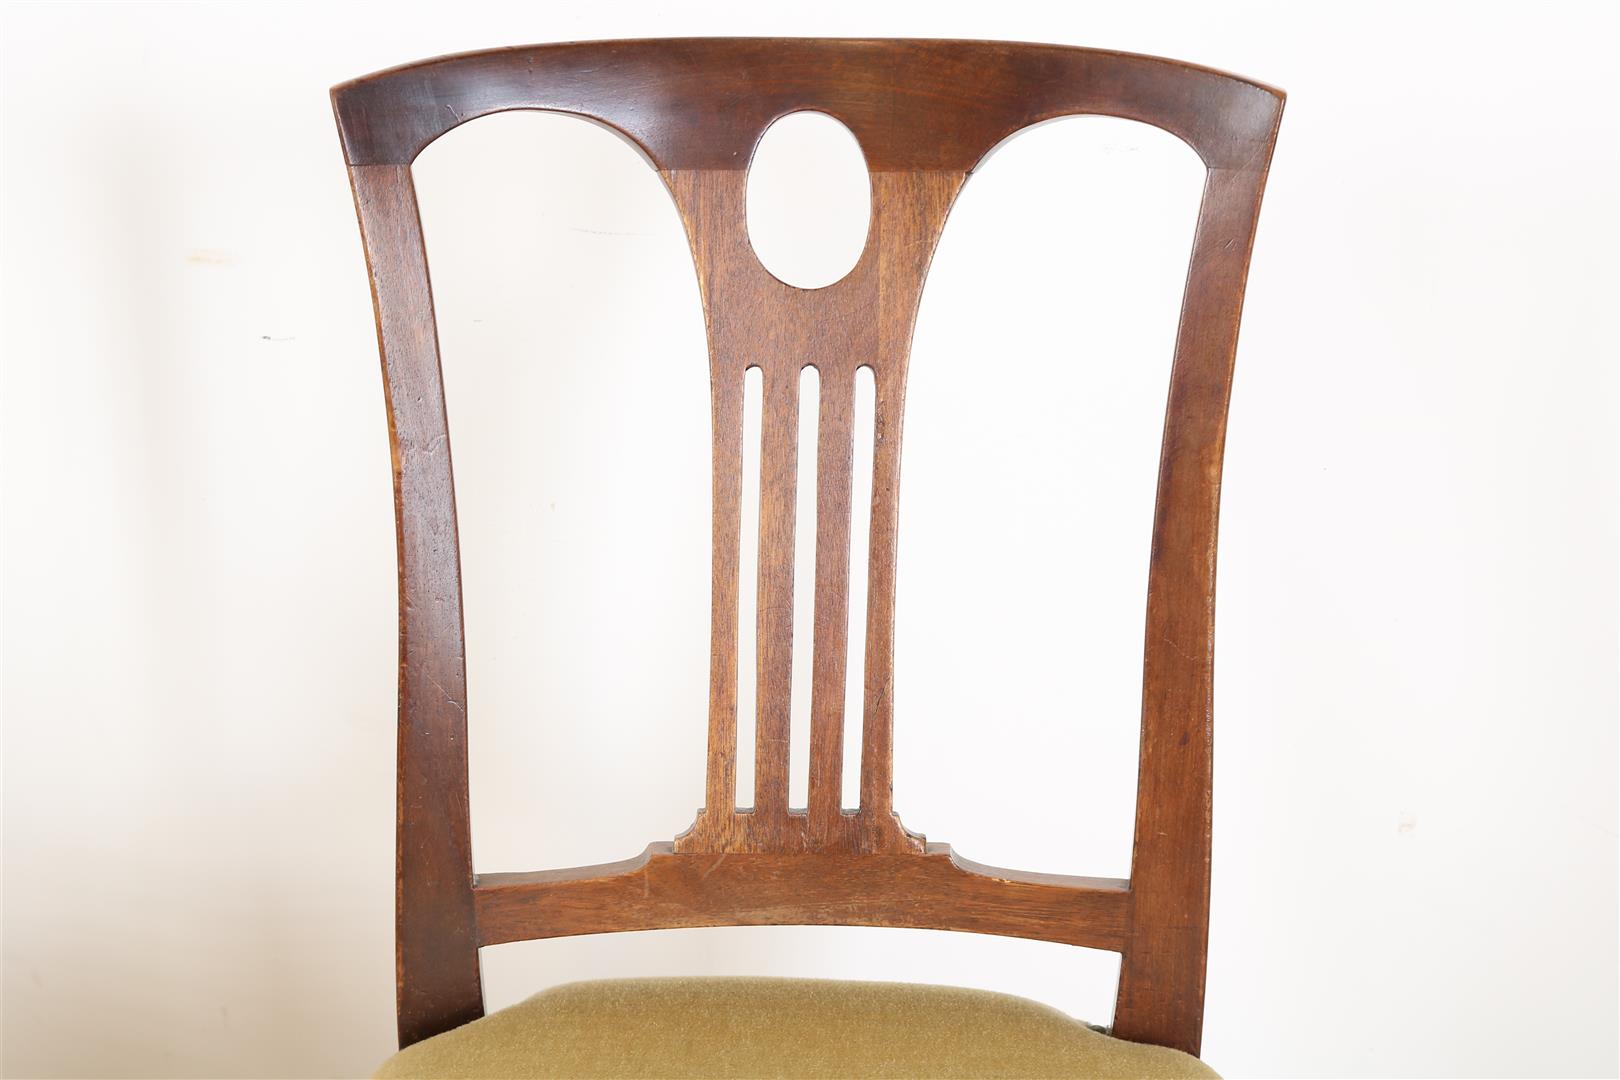 6 openwork wooden chairs, late 19th century. - Image 2 of 5